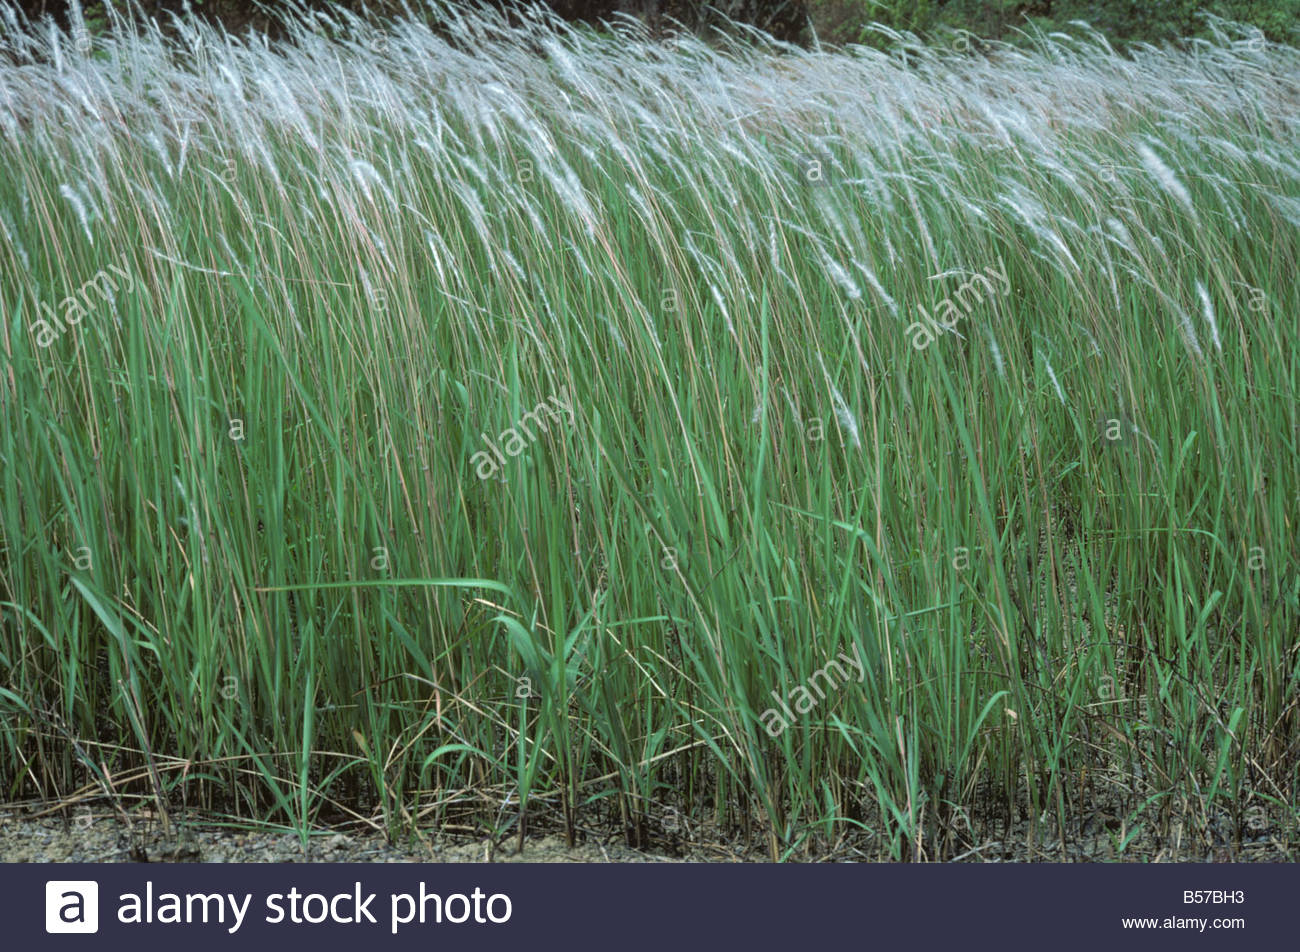 Cogongrass or lalang Imperata cylindrica seeding flower spikes Malaysia